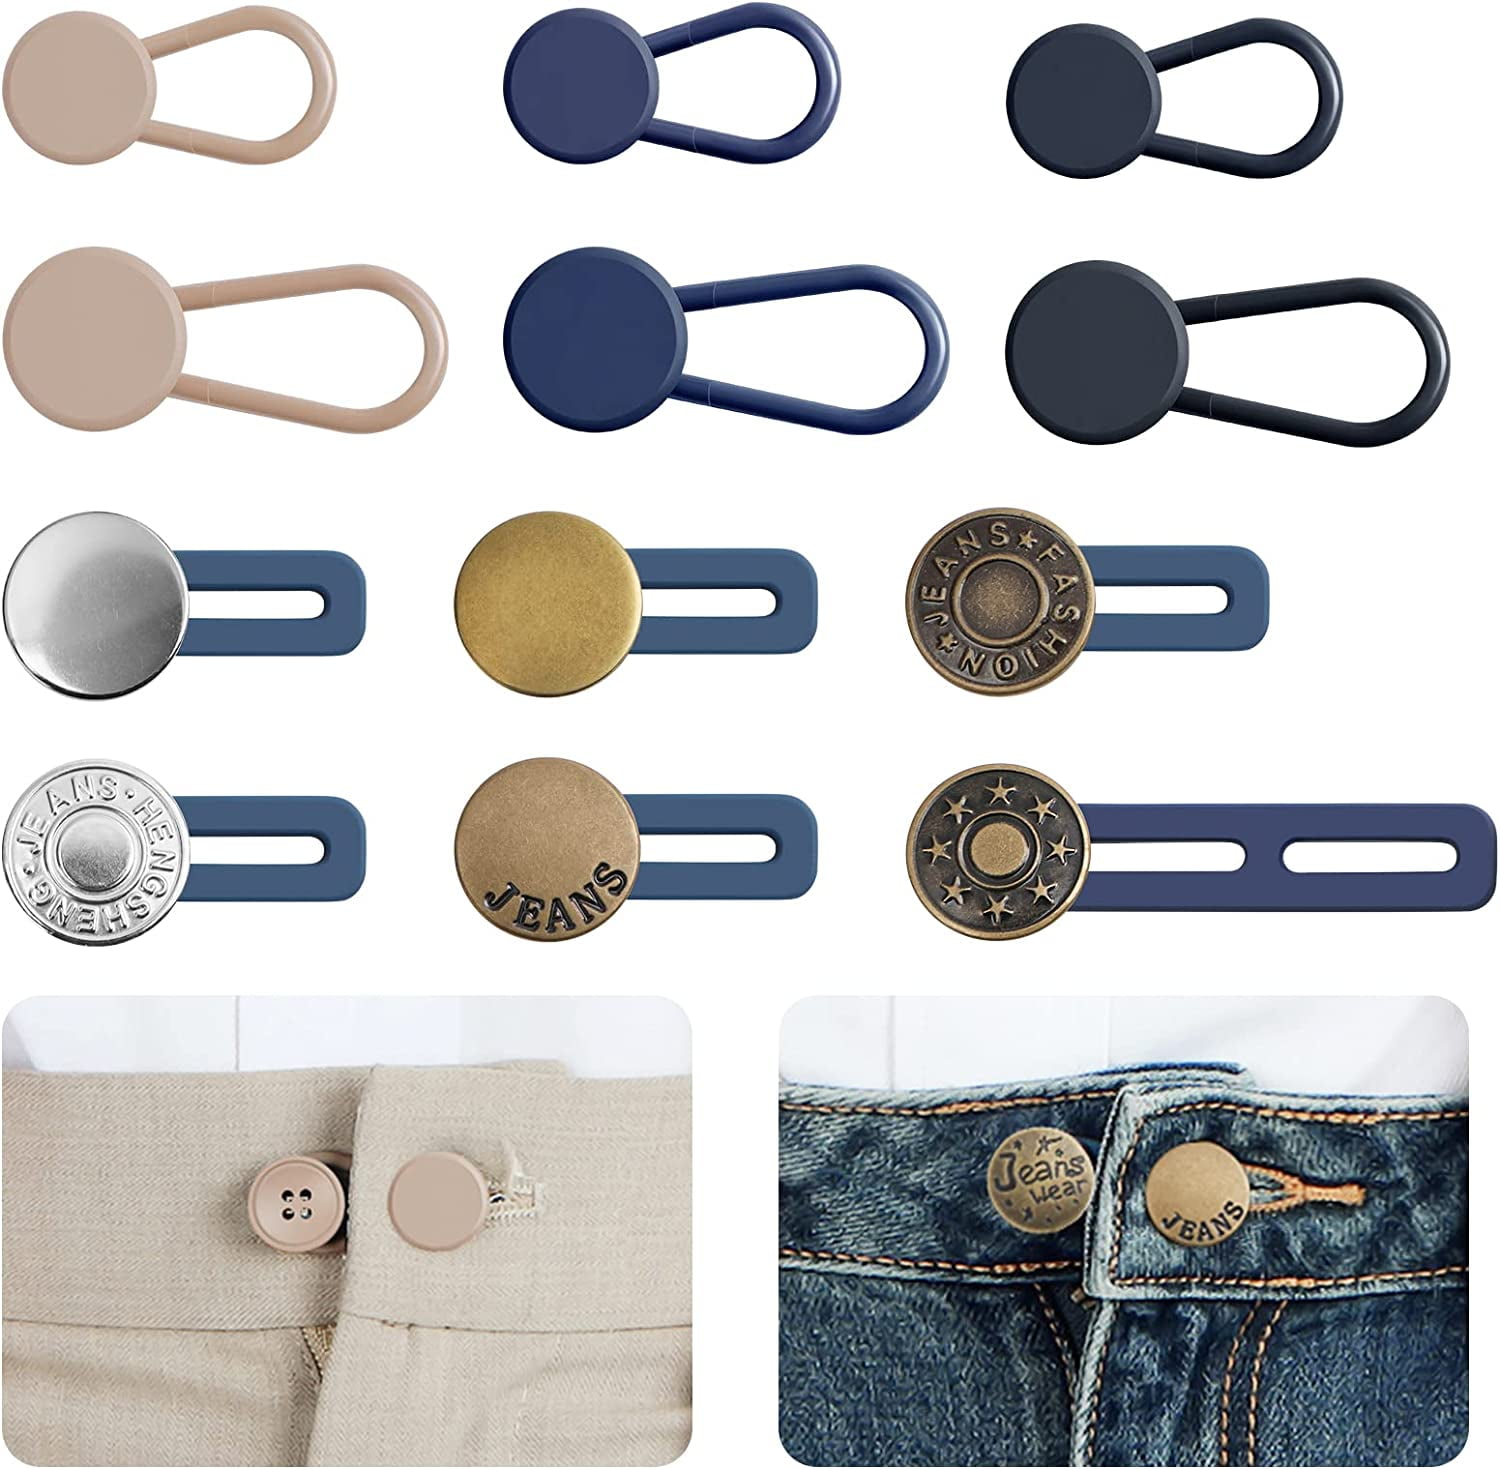 12PCS Button Extenders for Jeans Pants Button Extender Waist Extenders for Pants for Women Men No Sewing Instant Waistband Extension 1 1 8 Inches 9b0fff0d 7558 4d24 8451 ad00a91e33b7.3c2fa372bd97509a46ec80dfd33c64b1